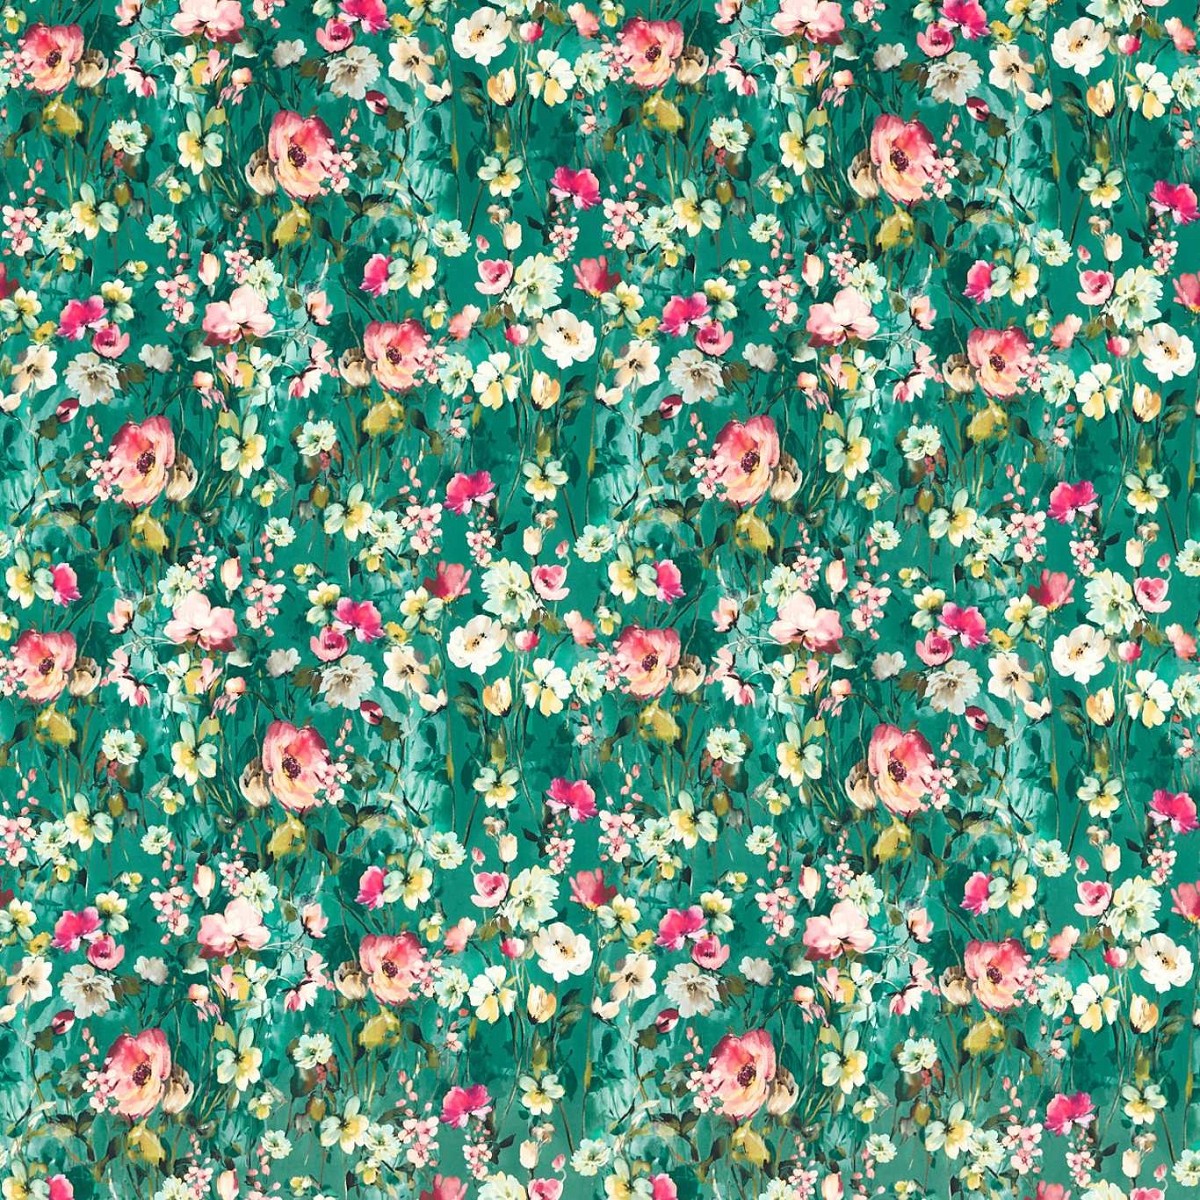 Wild Meadow Mineral Velvet Fabric by Studio G